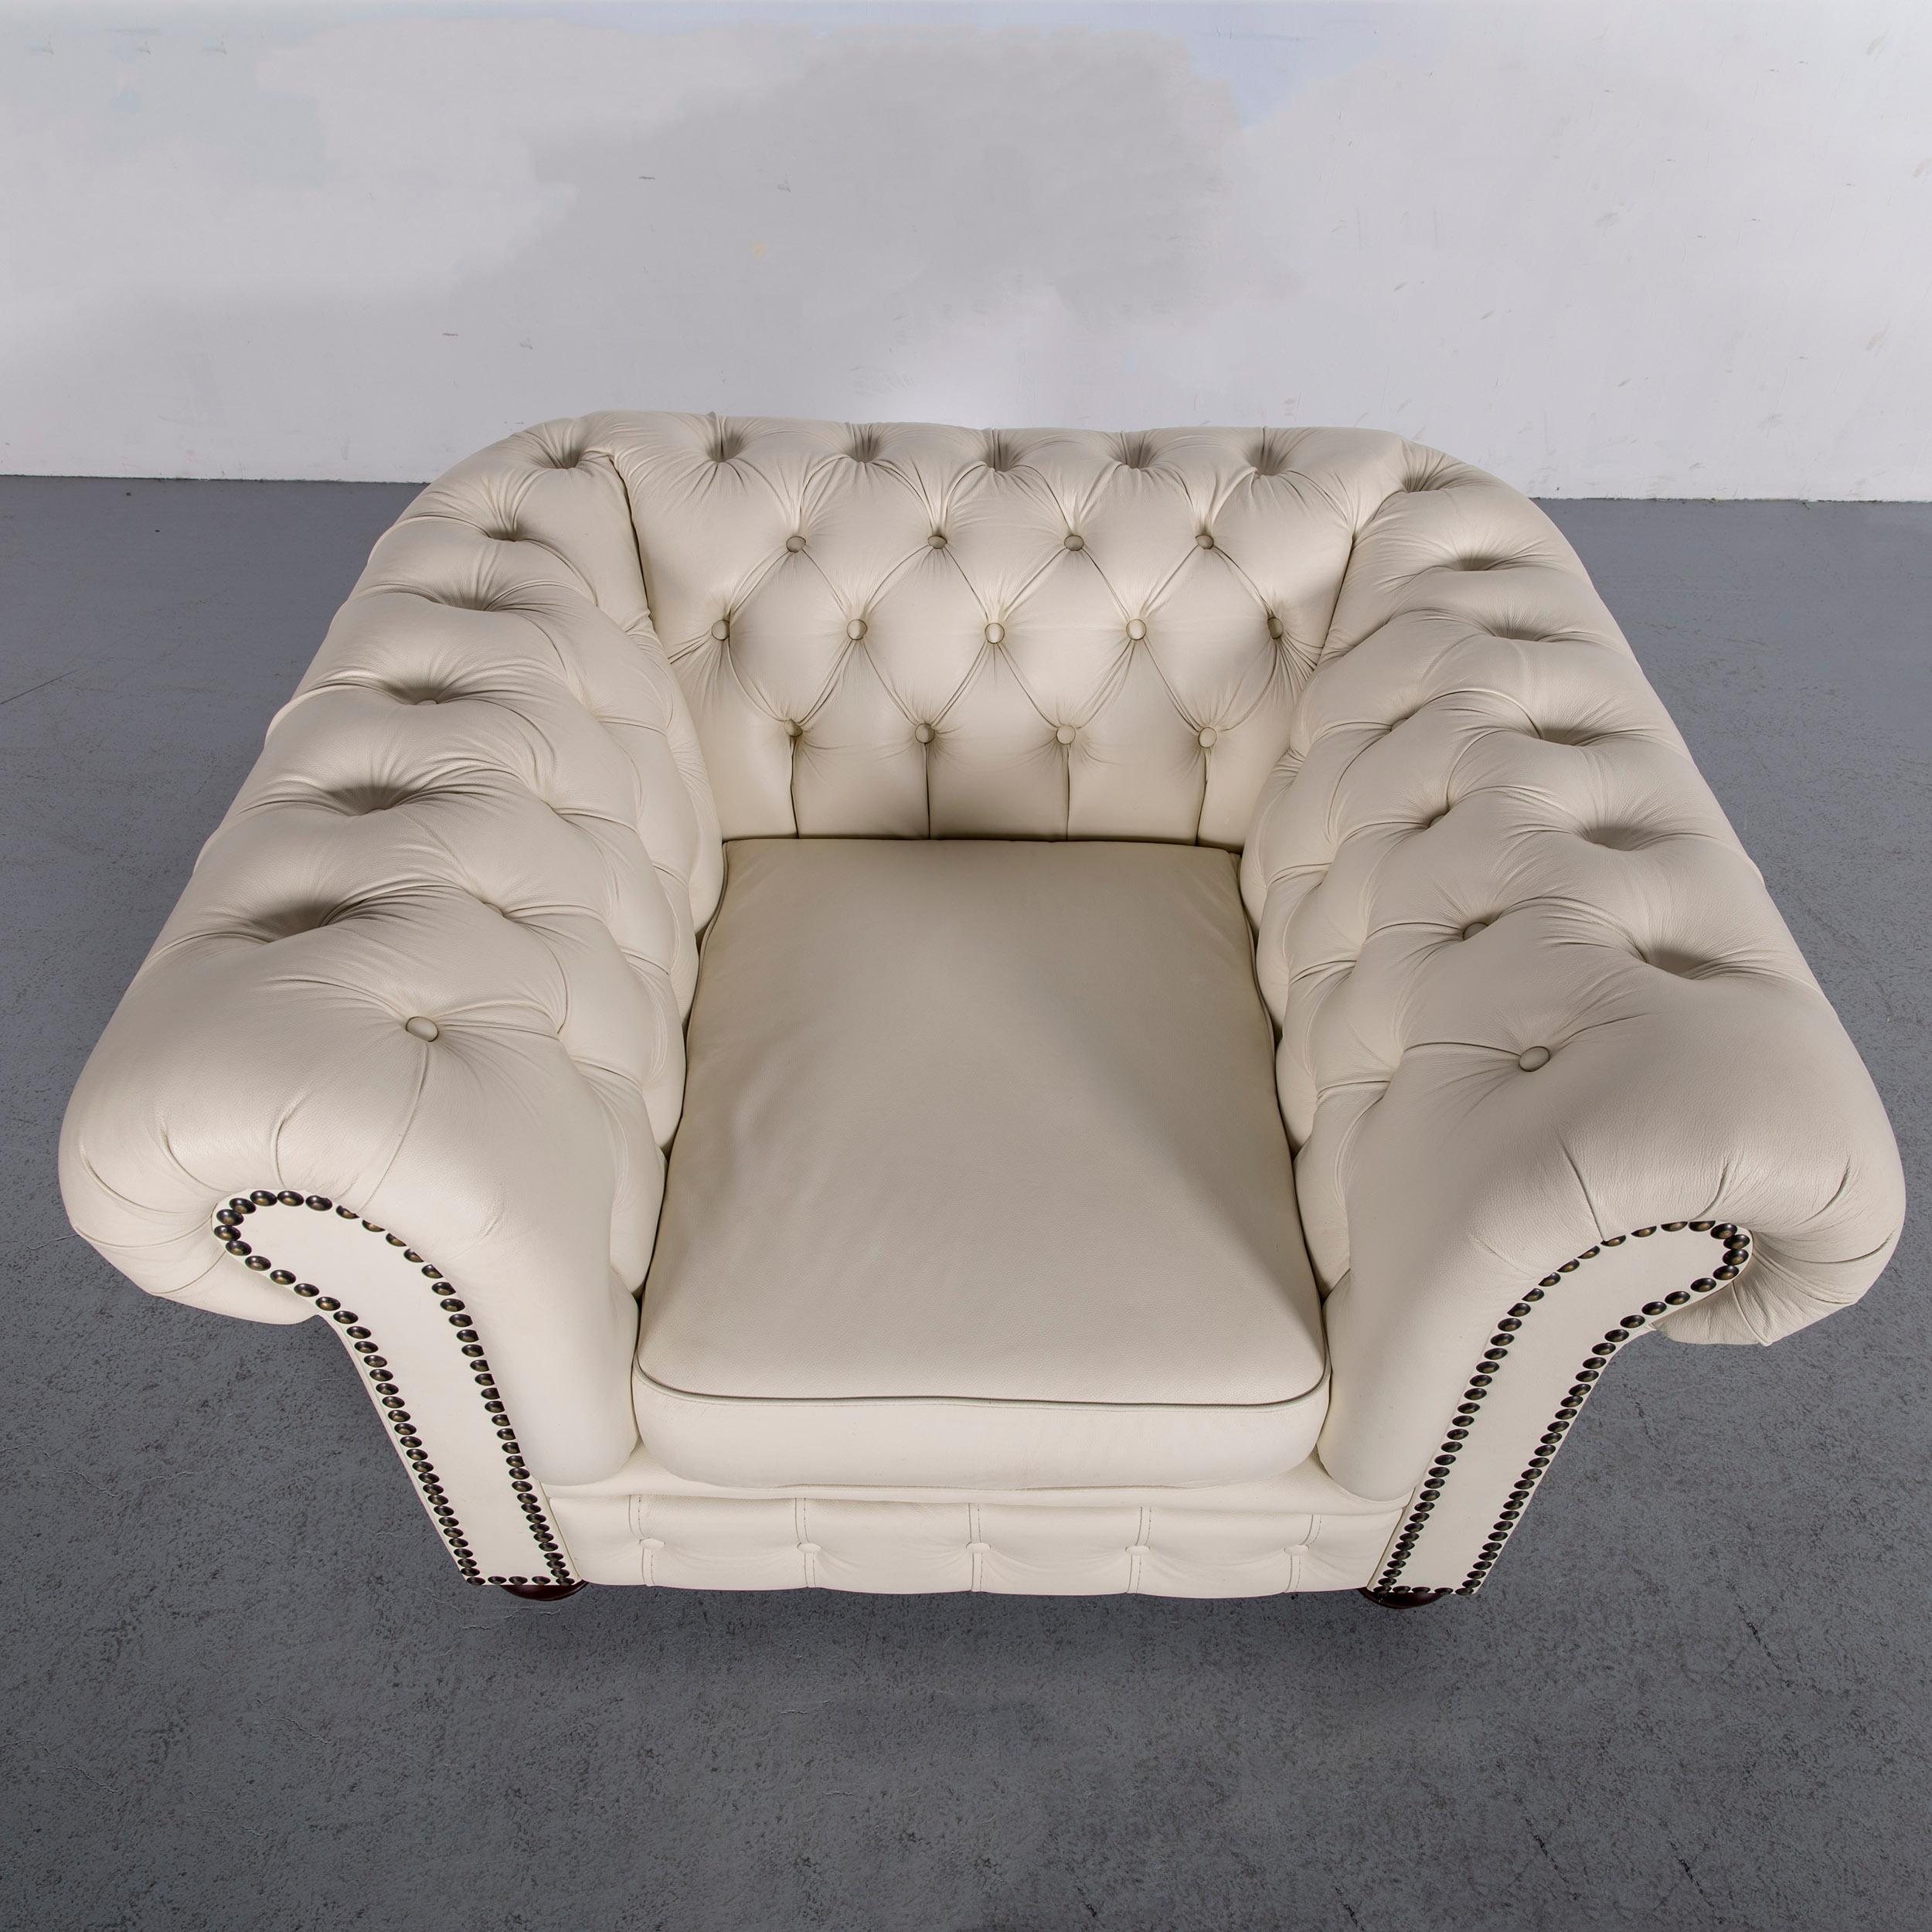 Contemporary Chesterfield Leather Armchair White One-Seat Vintage Retro